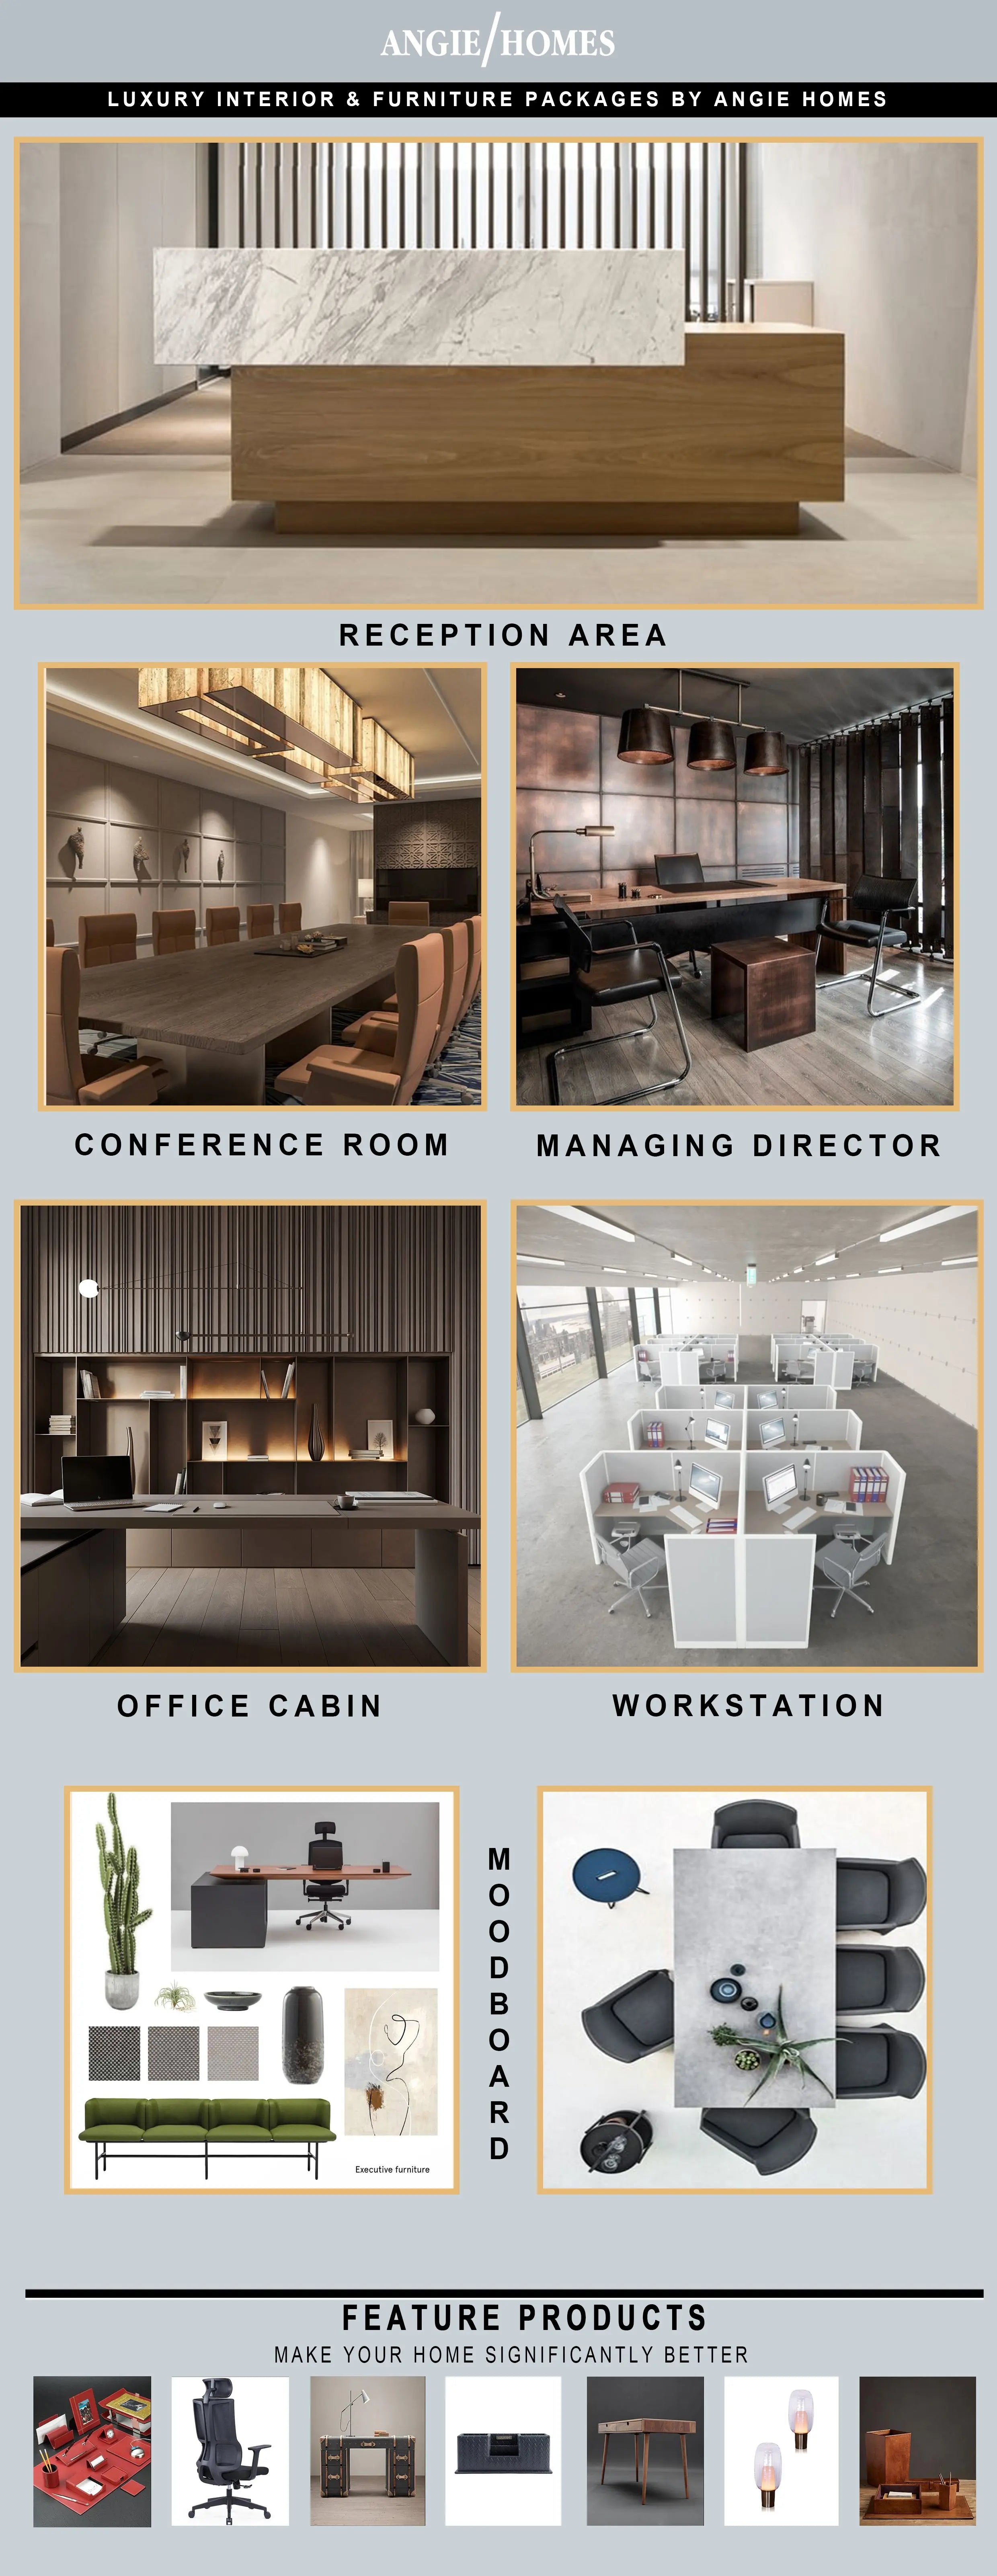 Oxford Small Office Interiors ANGIE HOMES